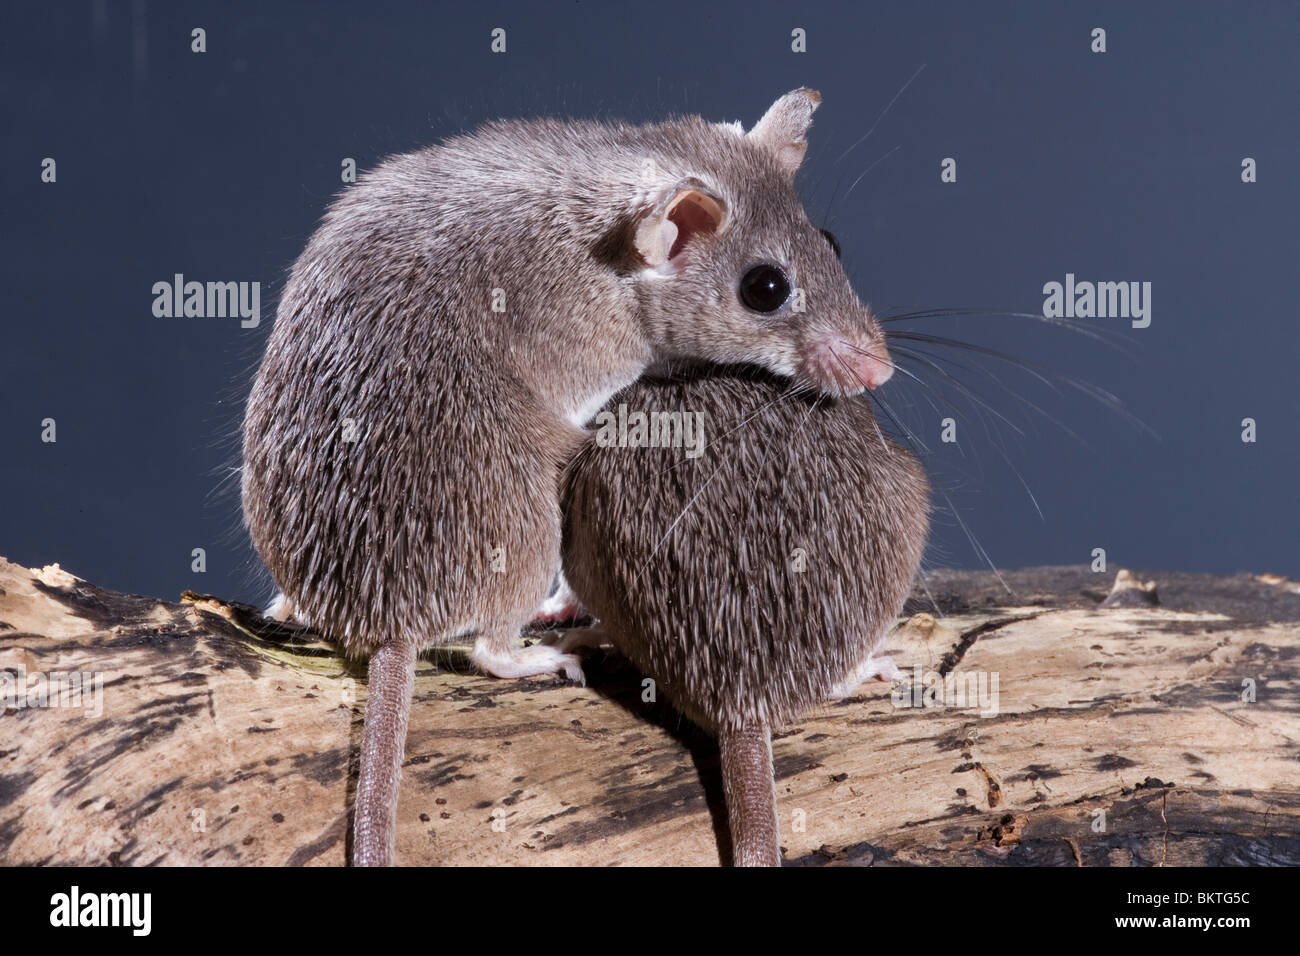 Egyptian Spiny Mice (Acomys cahirinus cahirinus). Side and rear views of animals showing spiny looking hair on backs, which gives them their popular name. Stock Photo